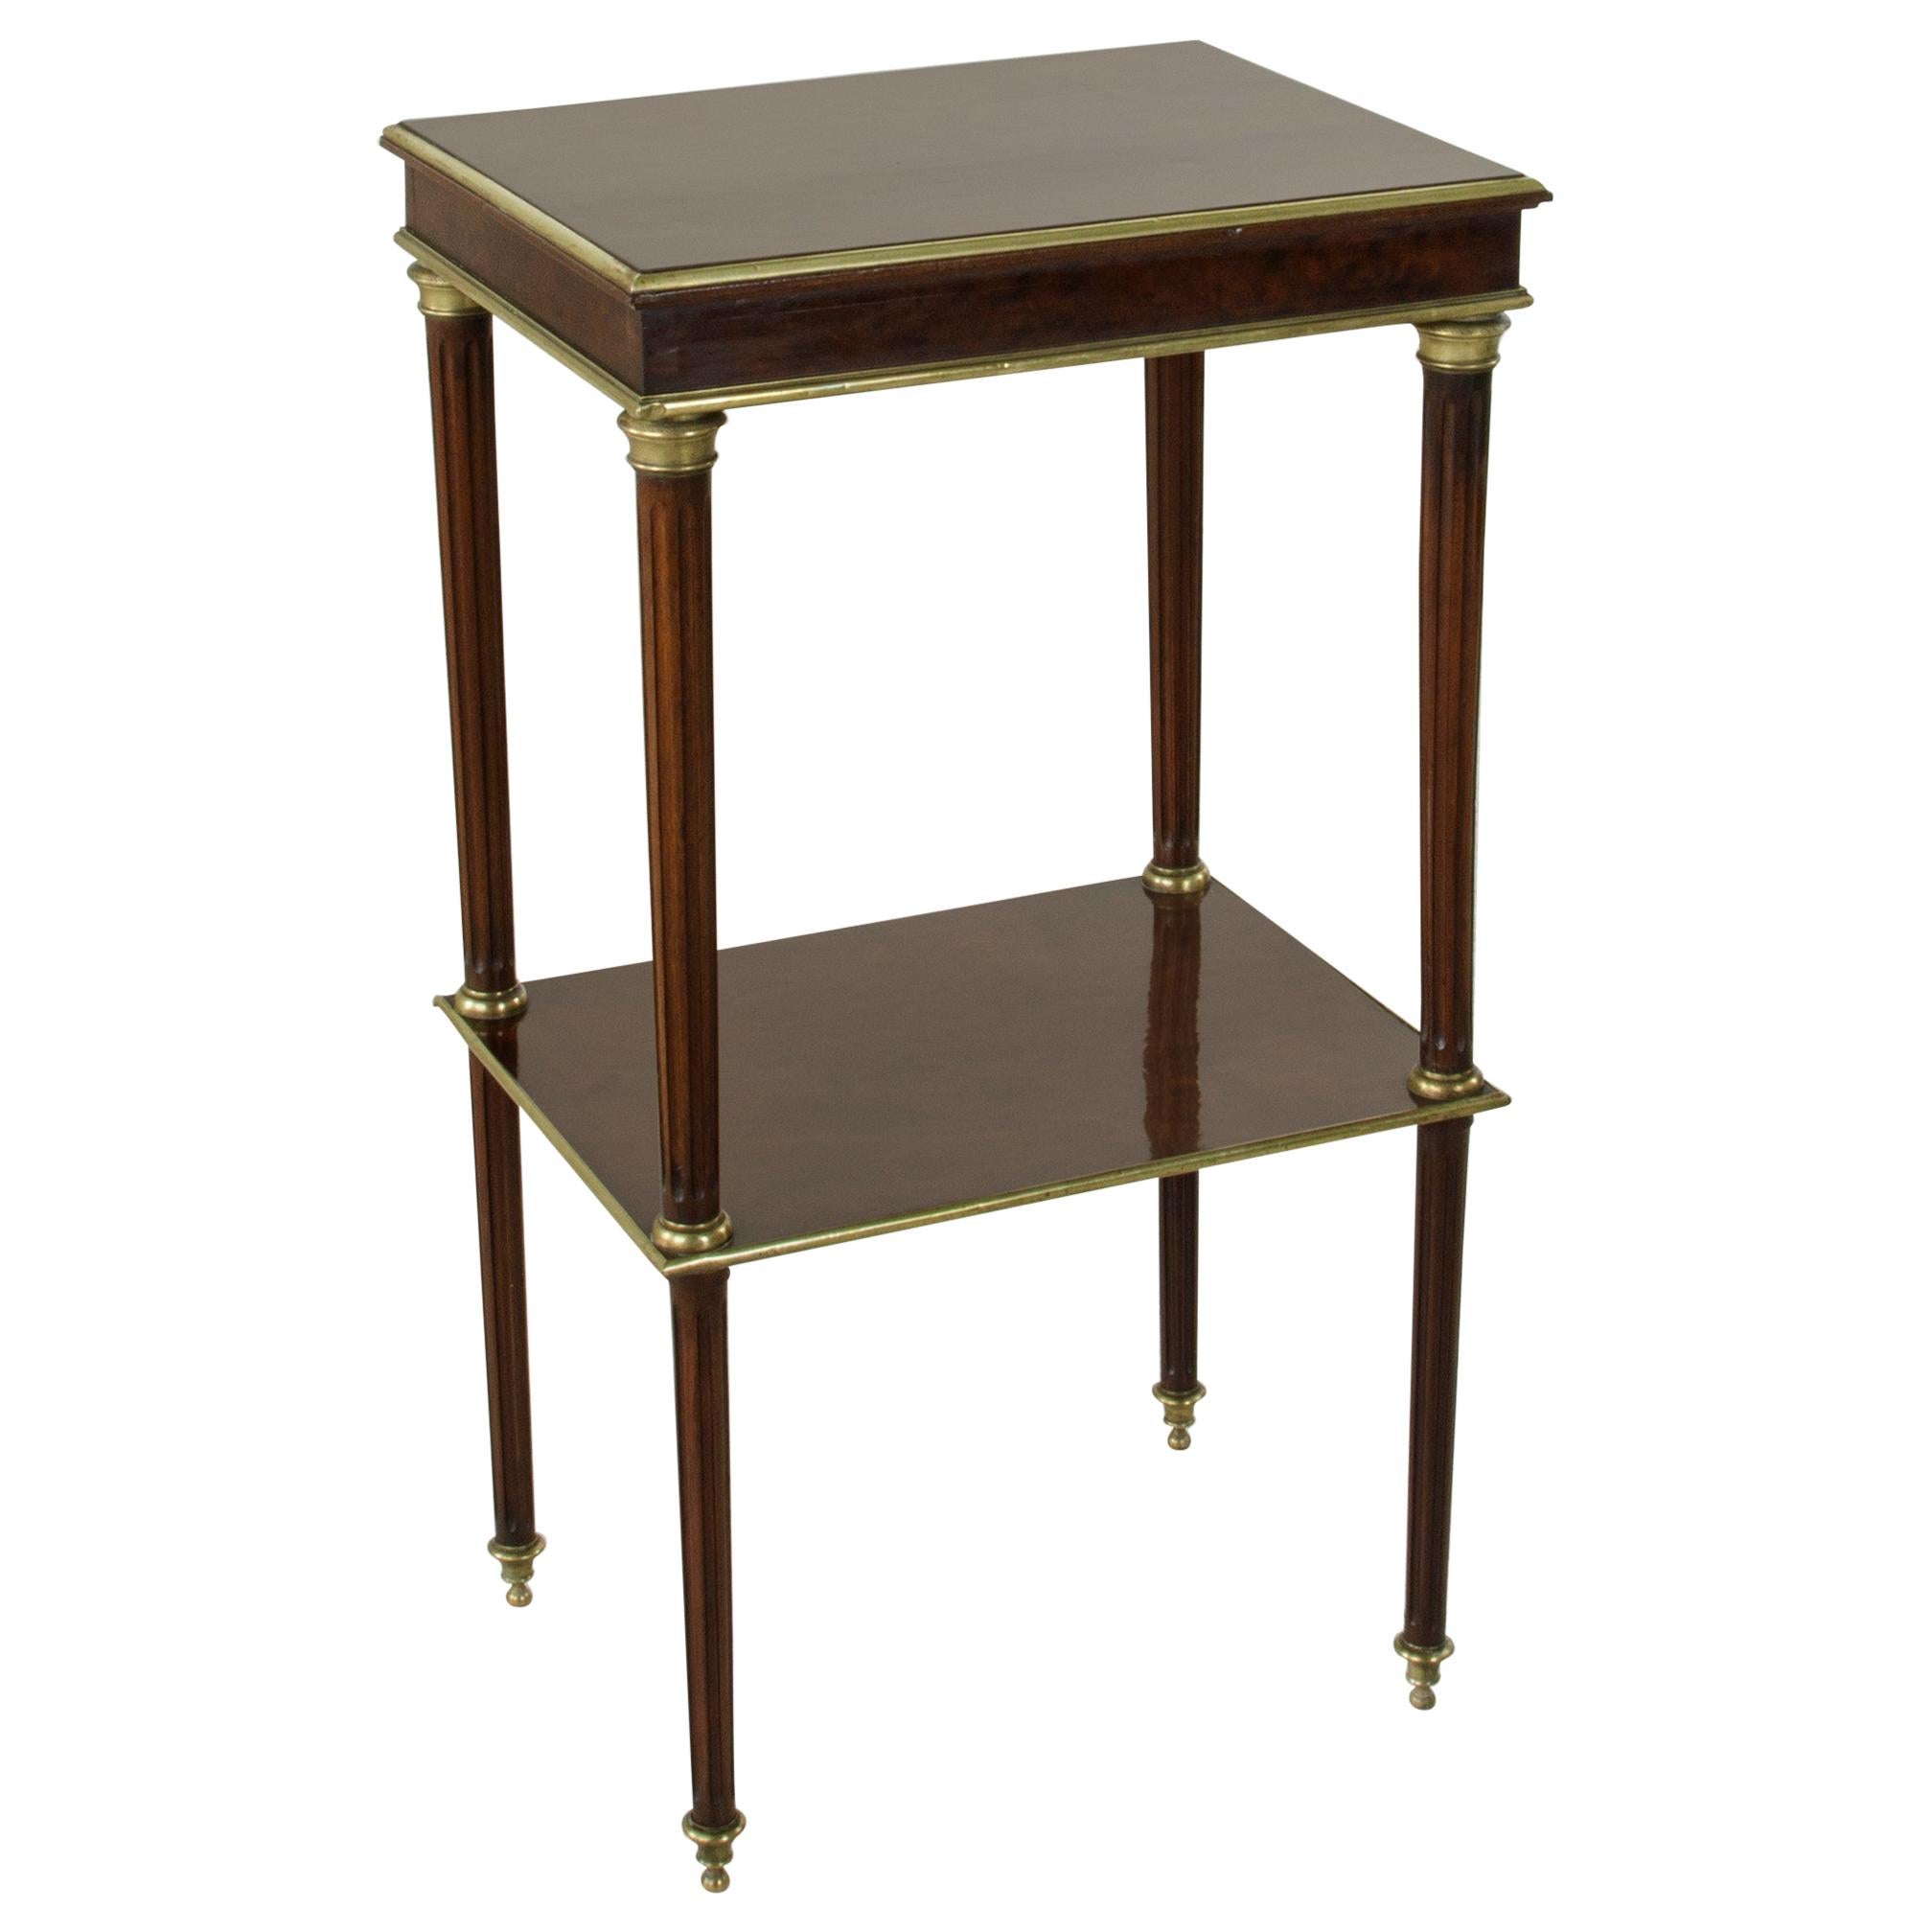 Mid-19th Century French Louis XVI Style Plum Pudding Mahogany Side Table, Bronze